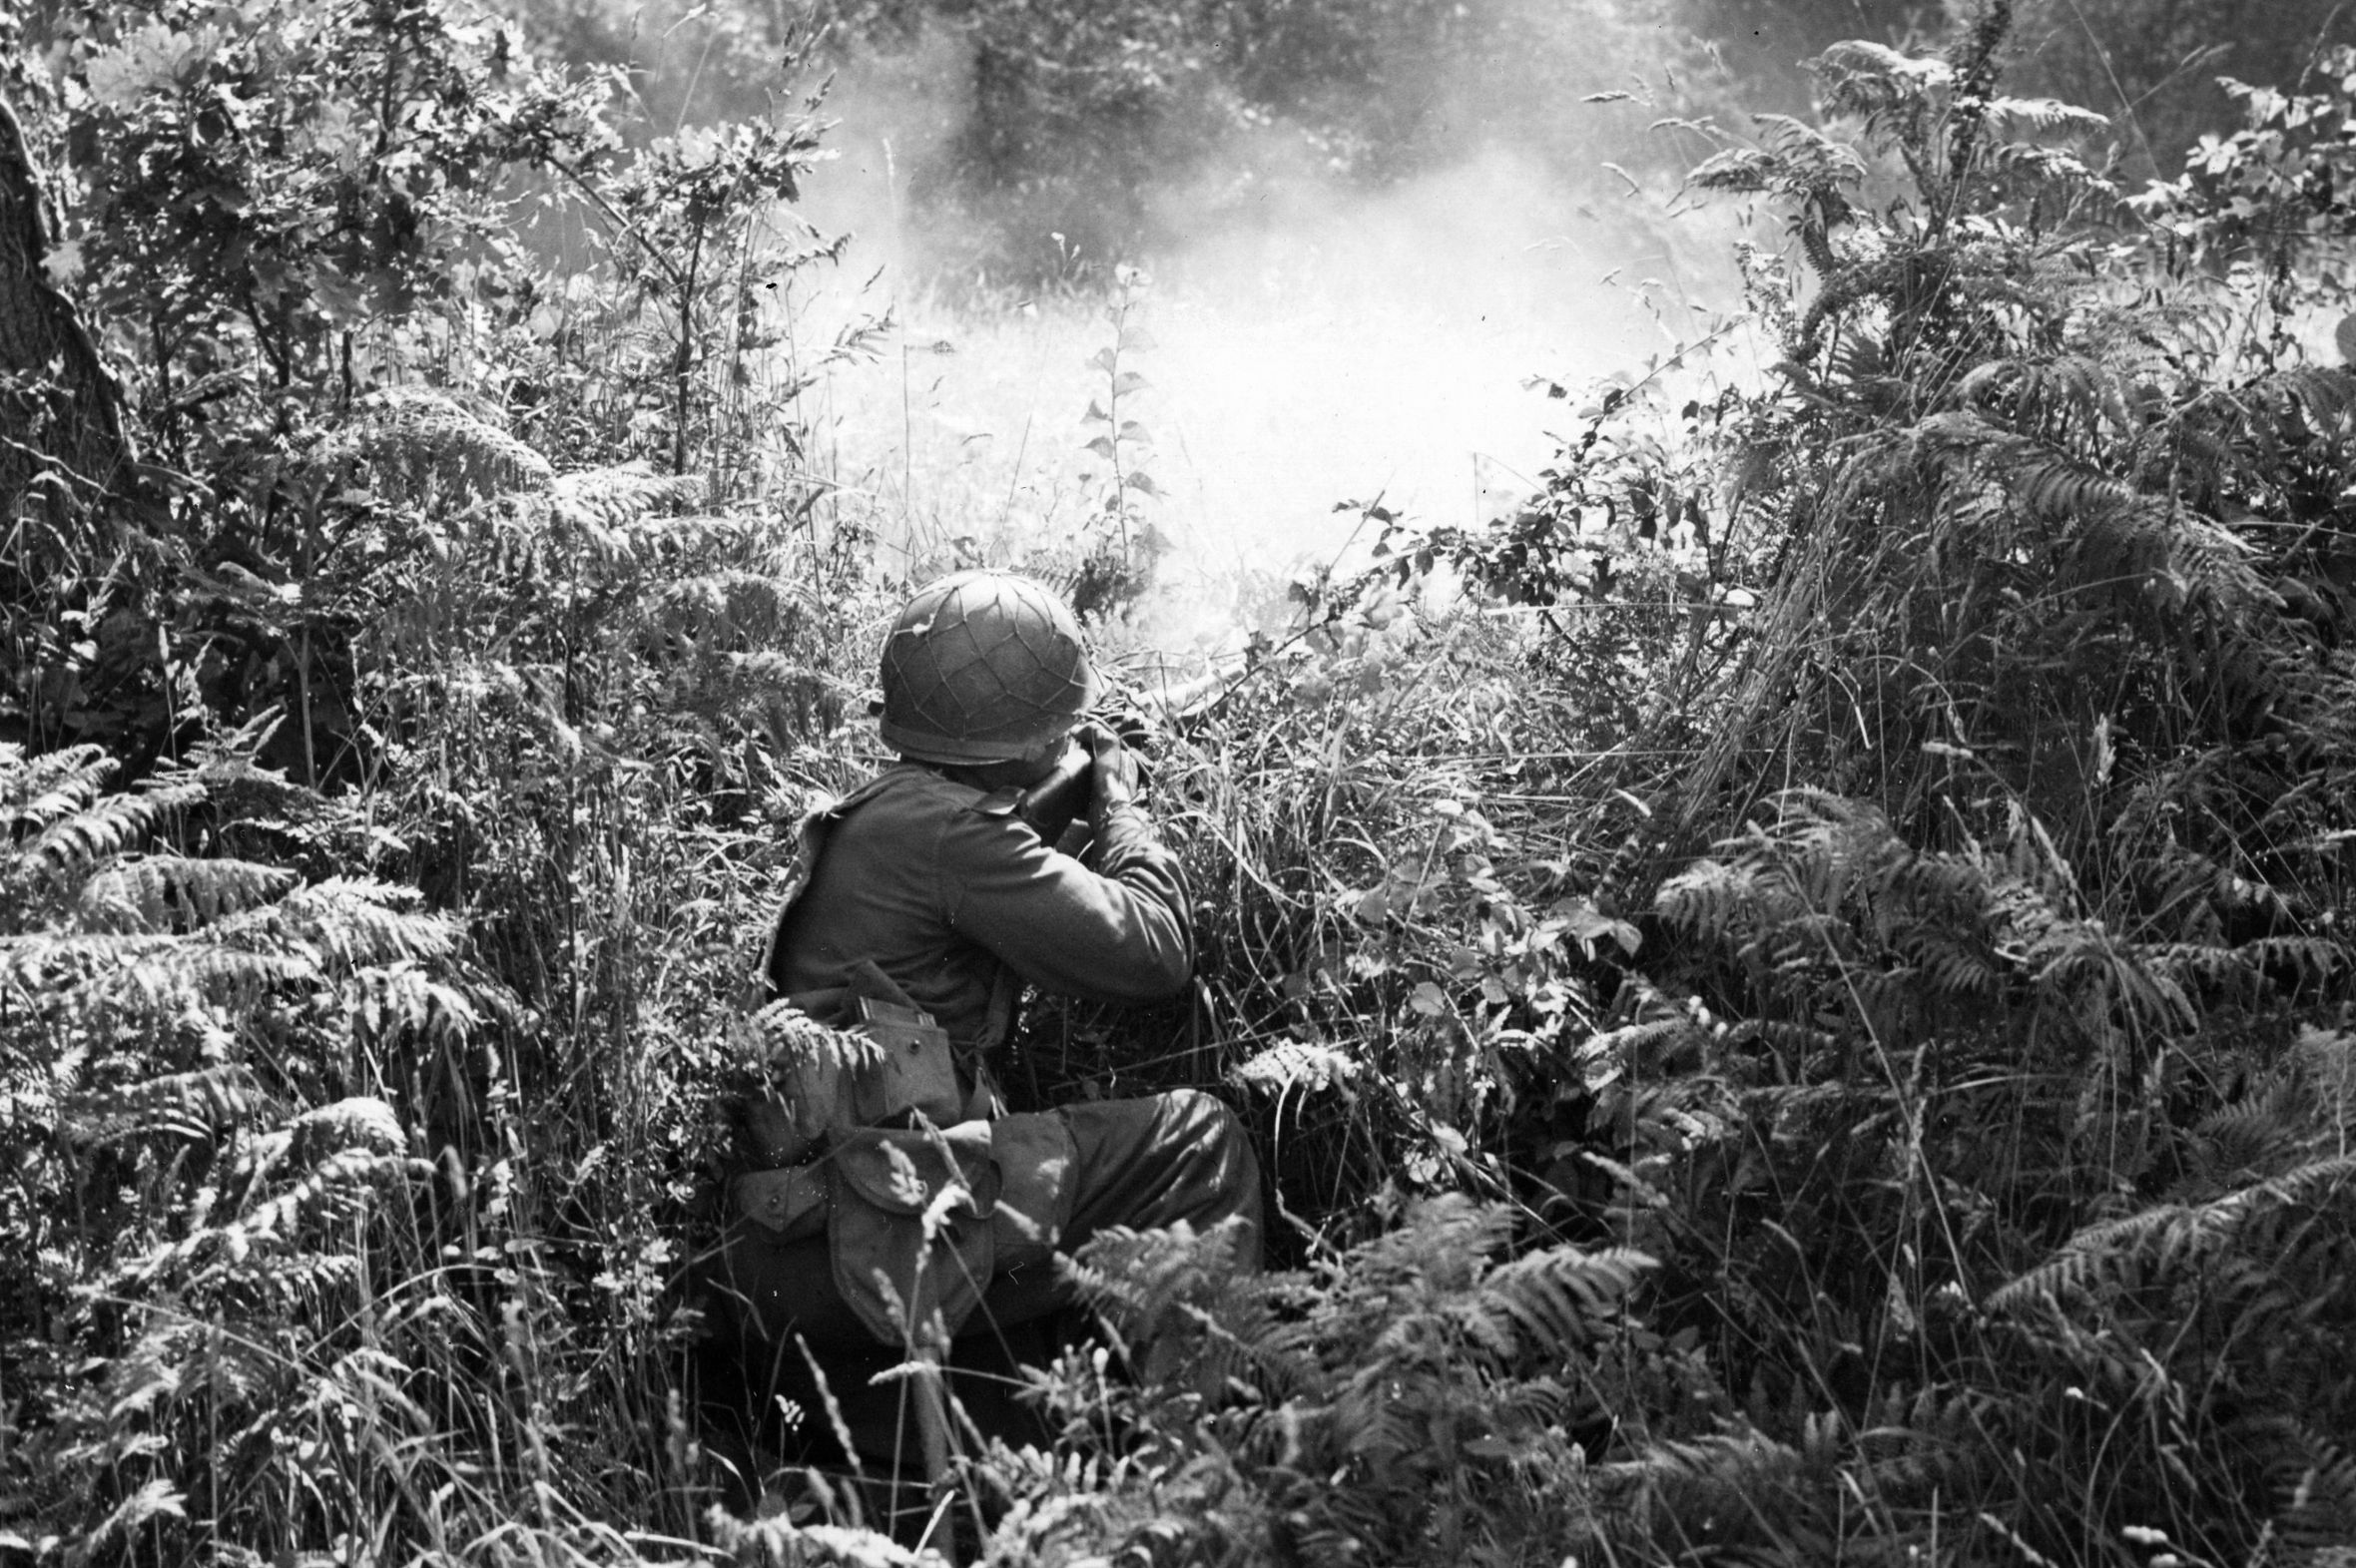 An American soldier, hidden in the Normandy terrain, fires on some Germans. At Brecourt Manor the Airborne troops utilized the German trenches for protection while they captured each artillery gun.